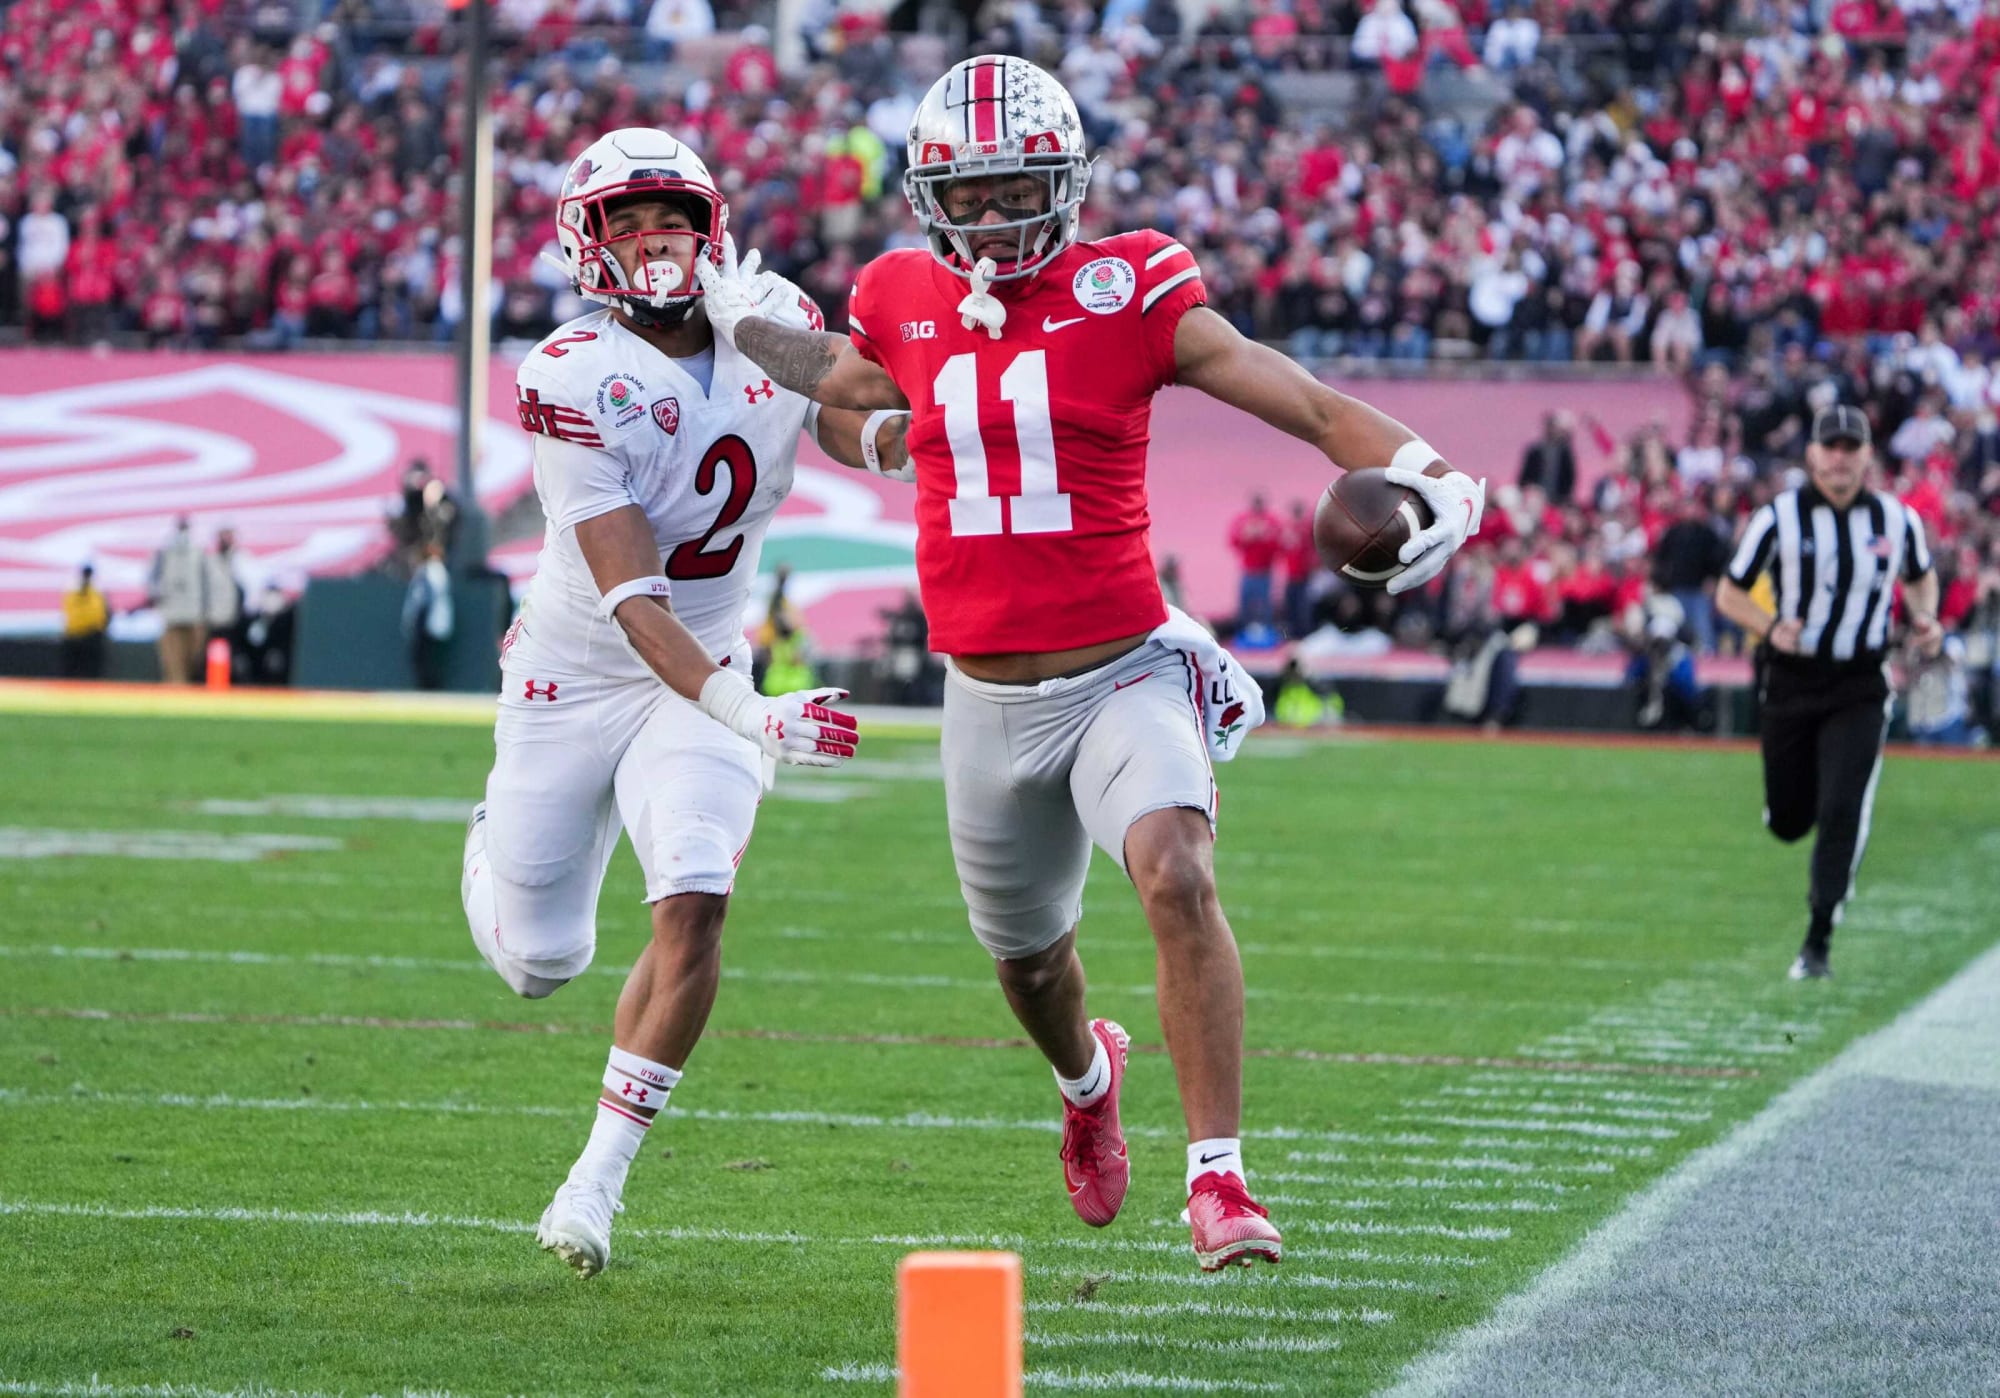 Photo of 2023 NFL Draft wide receiver odds: Jaxon Smith-Njigba overwhelming favorite, but can someone cash in?